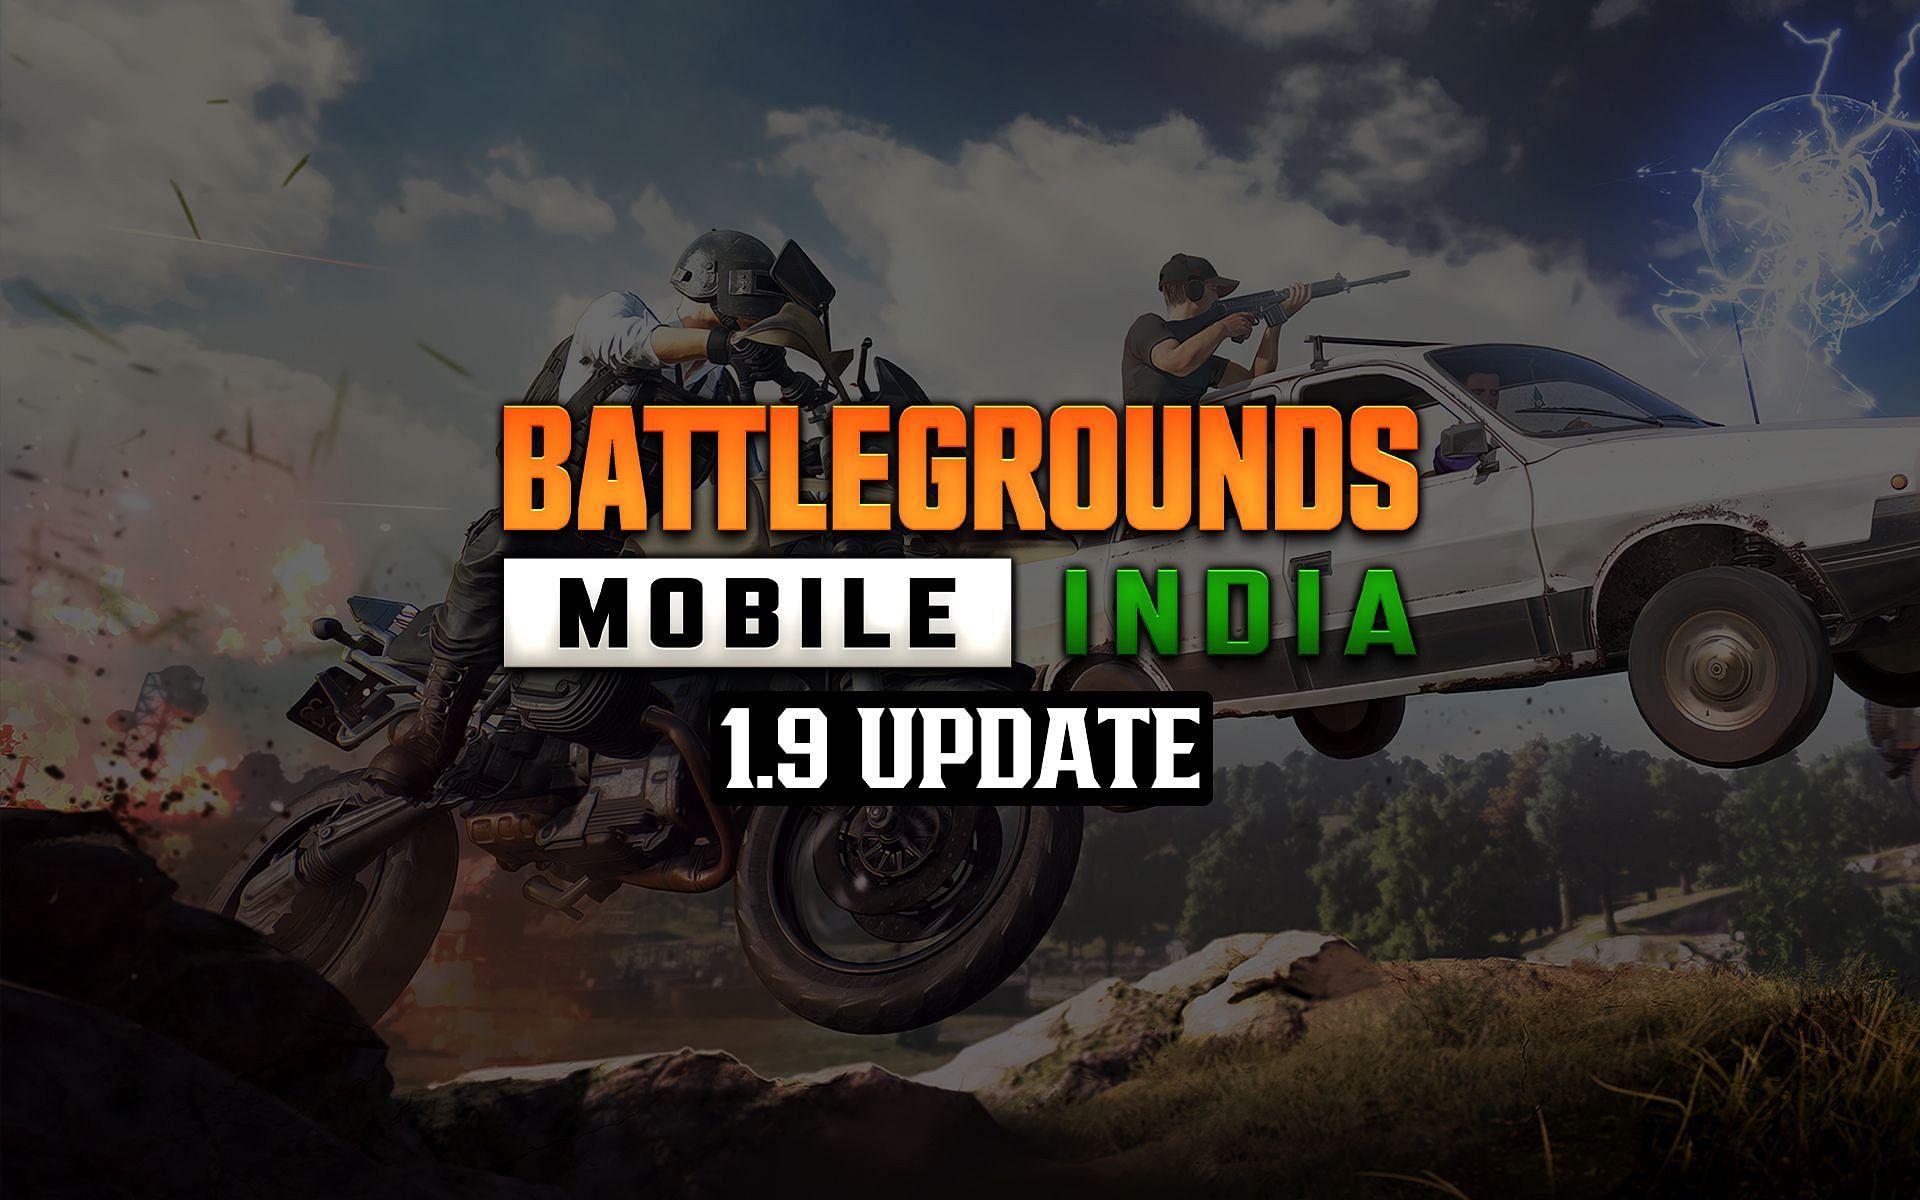 Learning more details about the new 1.9 update in BGMI (Image via Sportskeeda)